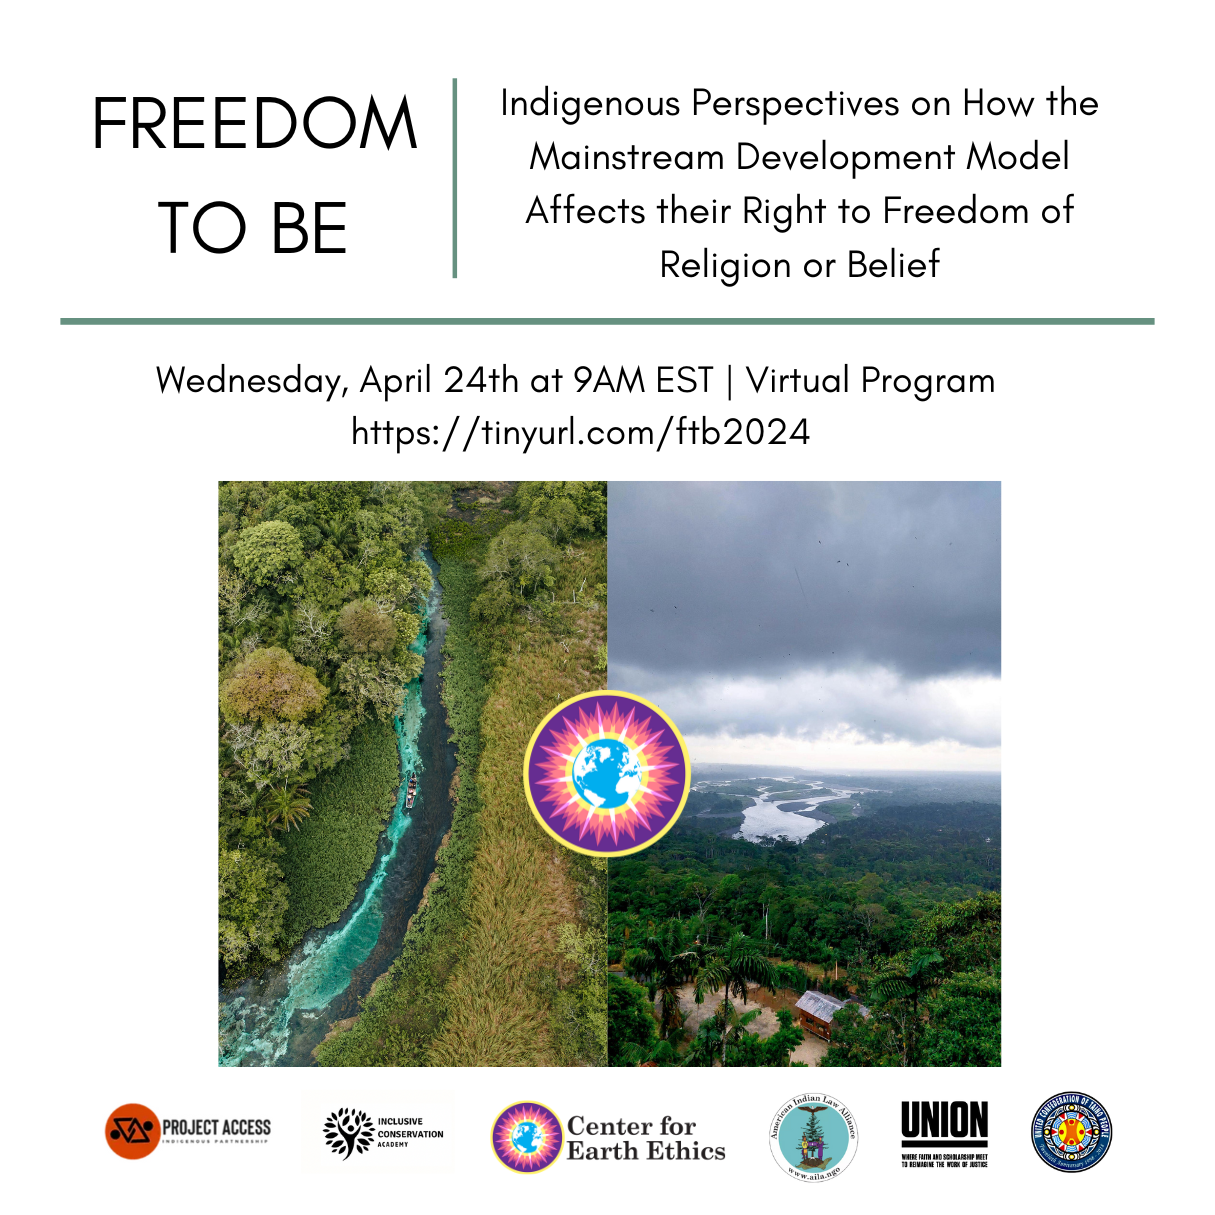 Freedom to Be: Indigenous Perspectives on How the Mainstream Development Model Affects Their Right to Freedom of Religion or Belief